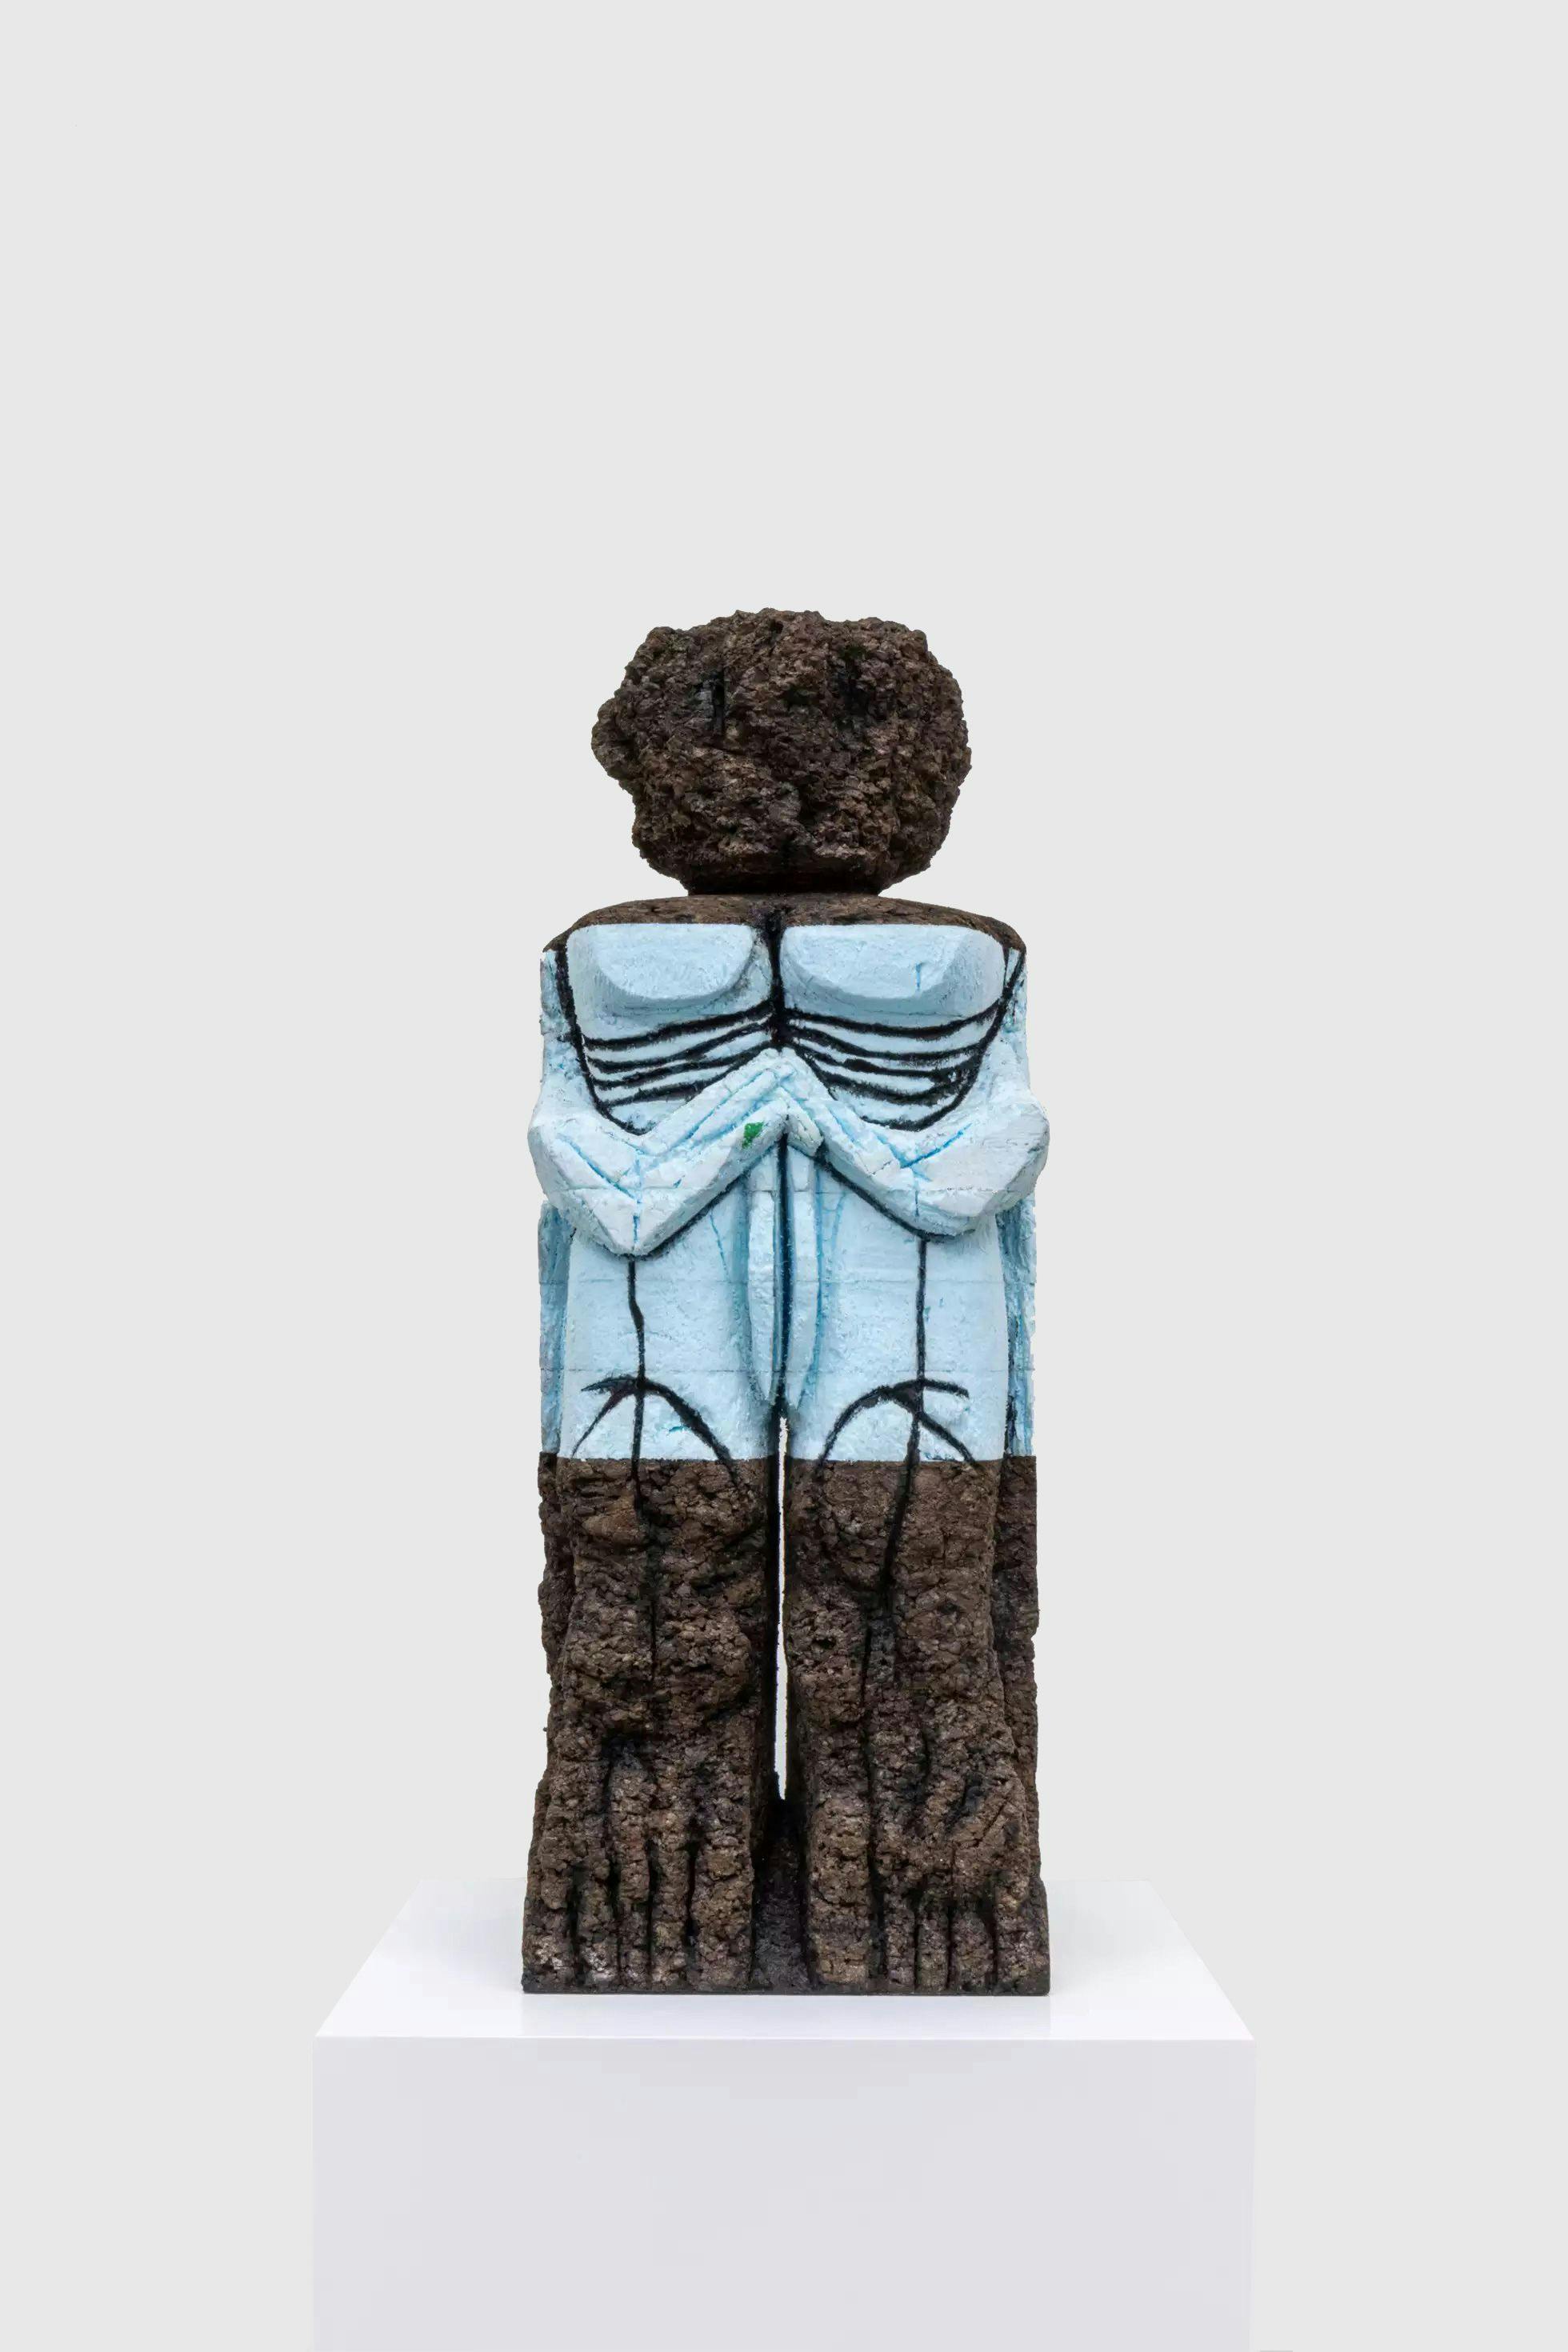 A sculpture titled comeback by Huma Bhabha, dated 2020